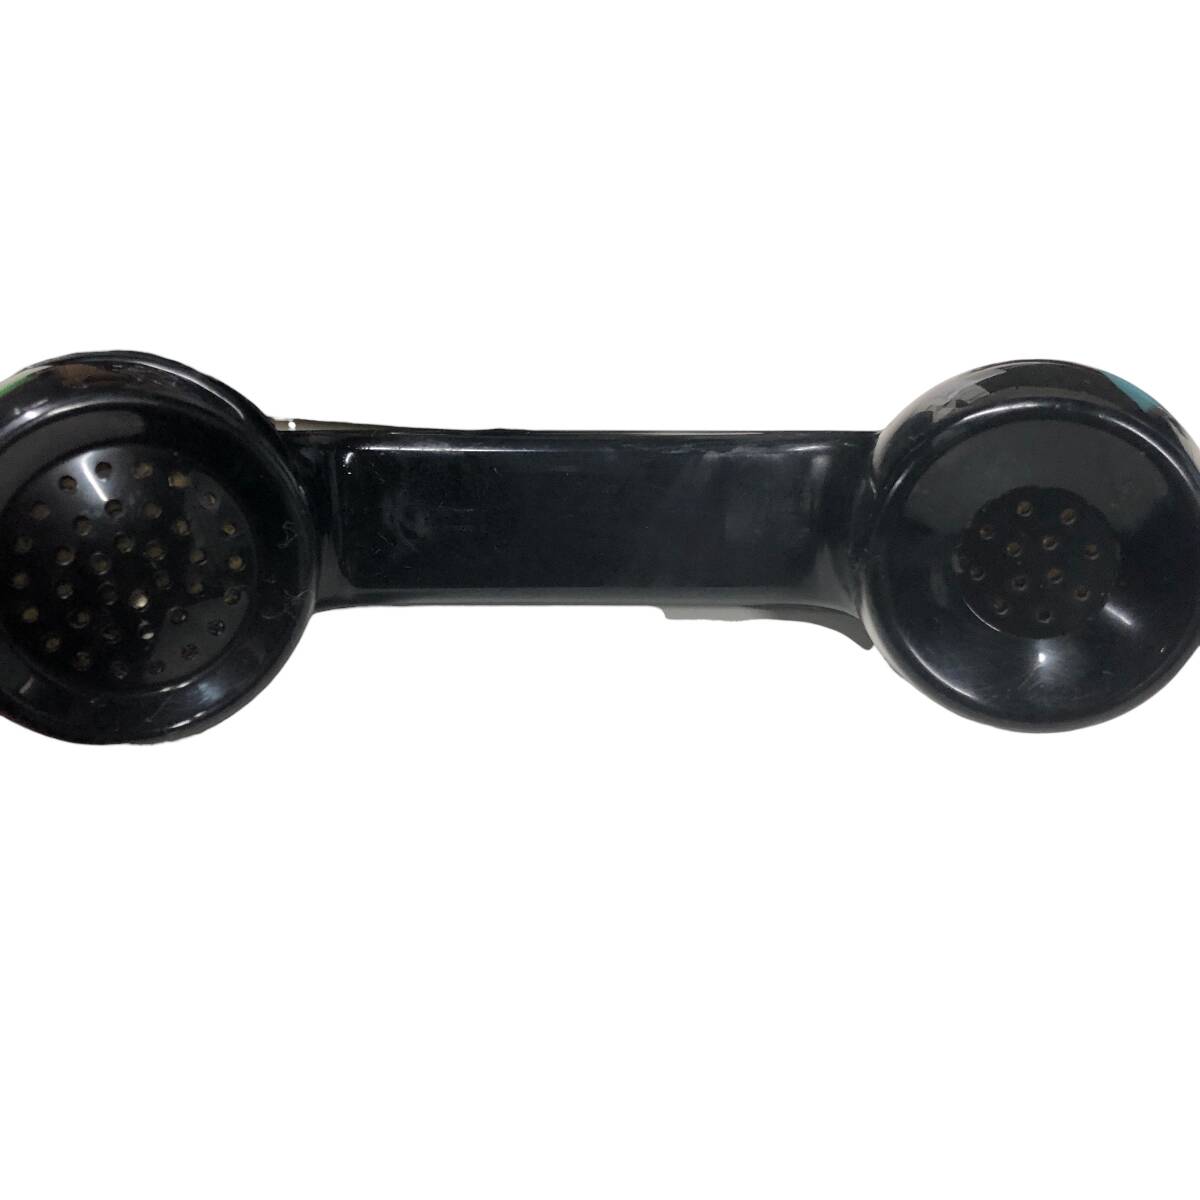 F474 black telephone 600-A2 Showa Retro modular jack dial type Japan electro- confidence telephone . company direct transactions (pick up) possible stone . city 